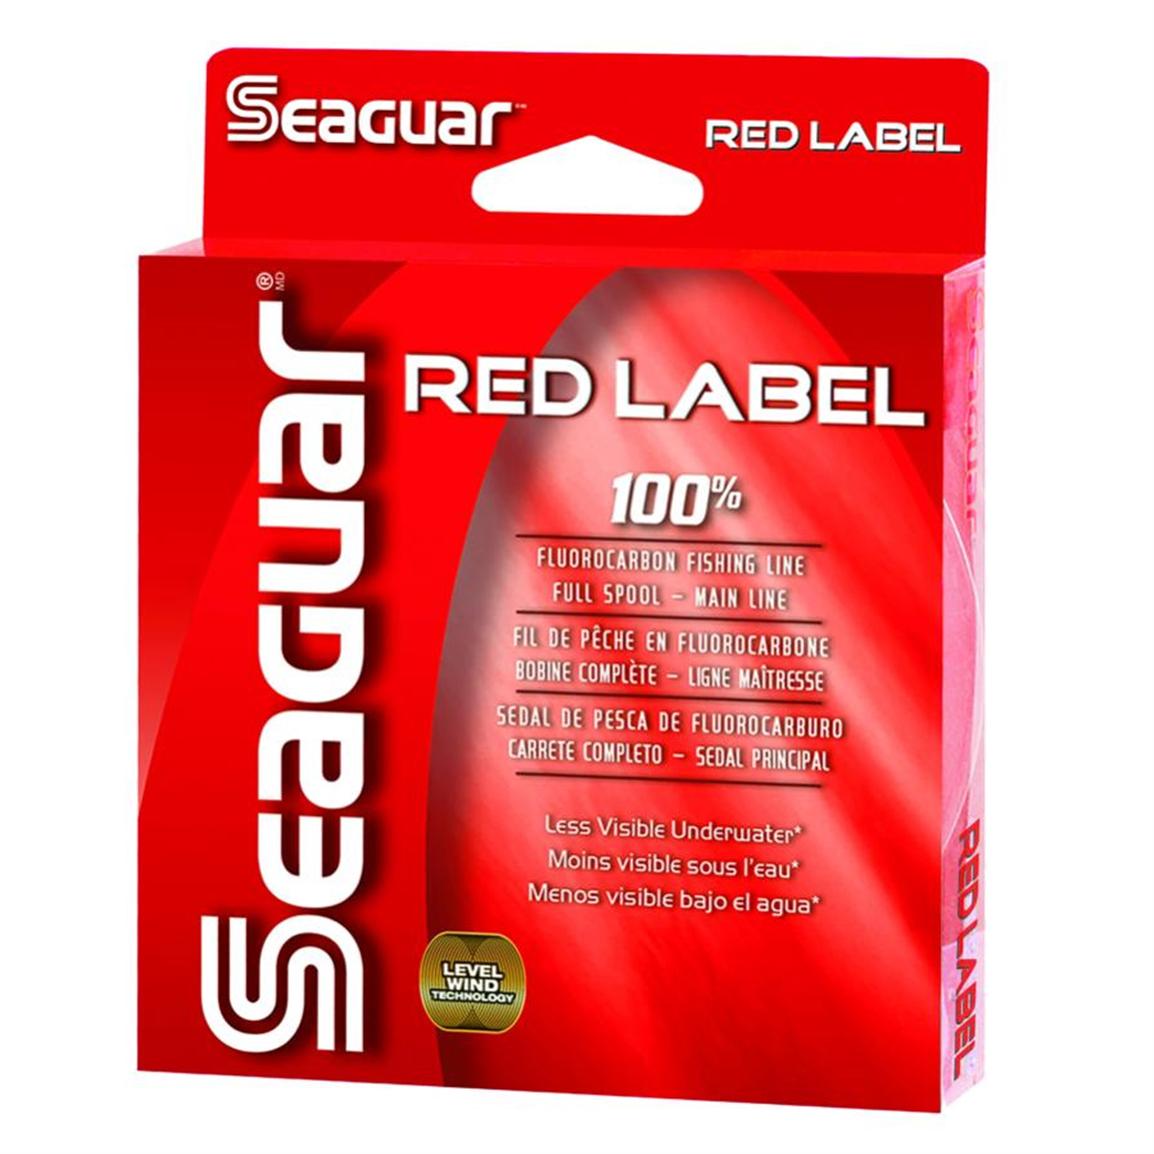 Seaguar Red Label Fluorocarbon Fishing Line 164083